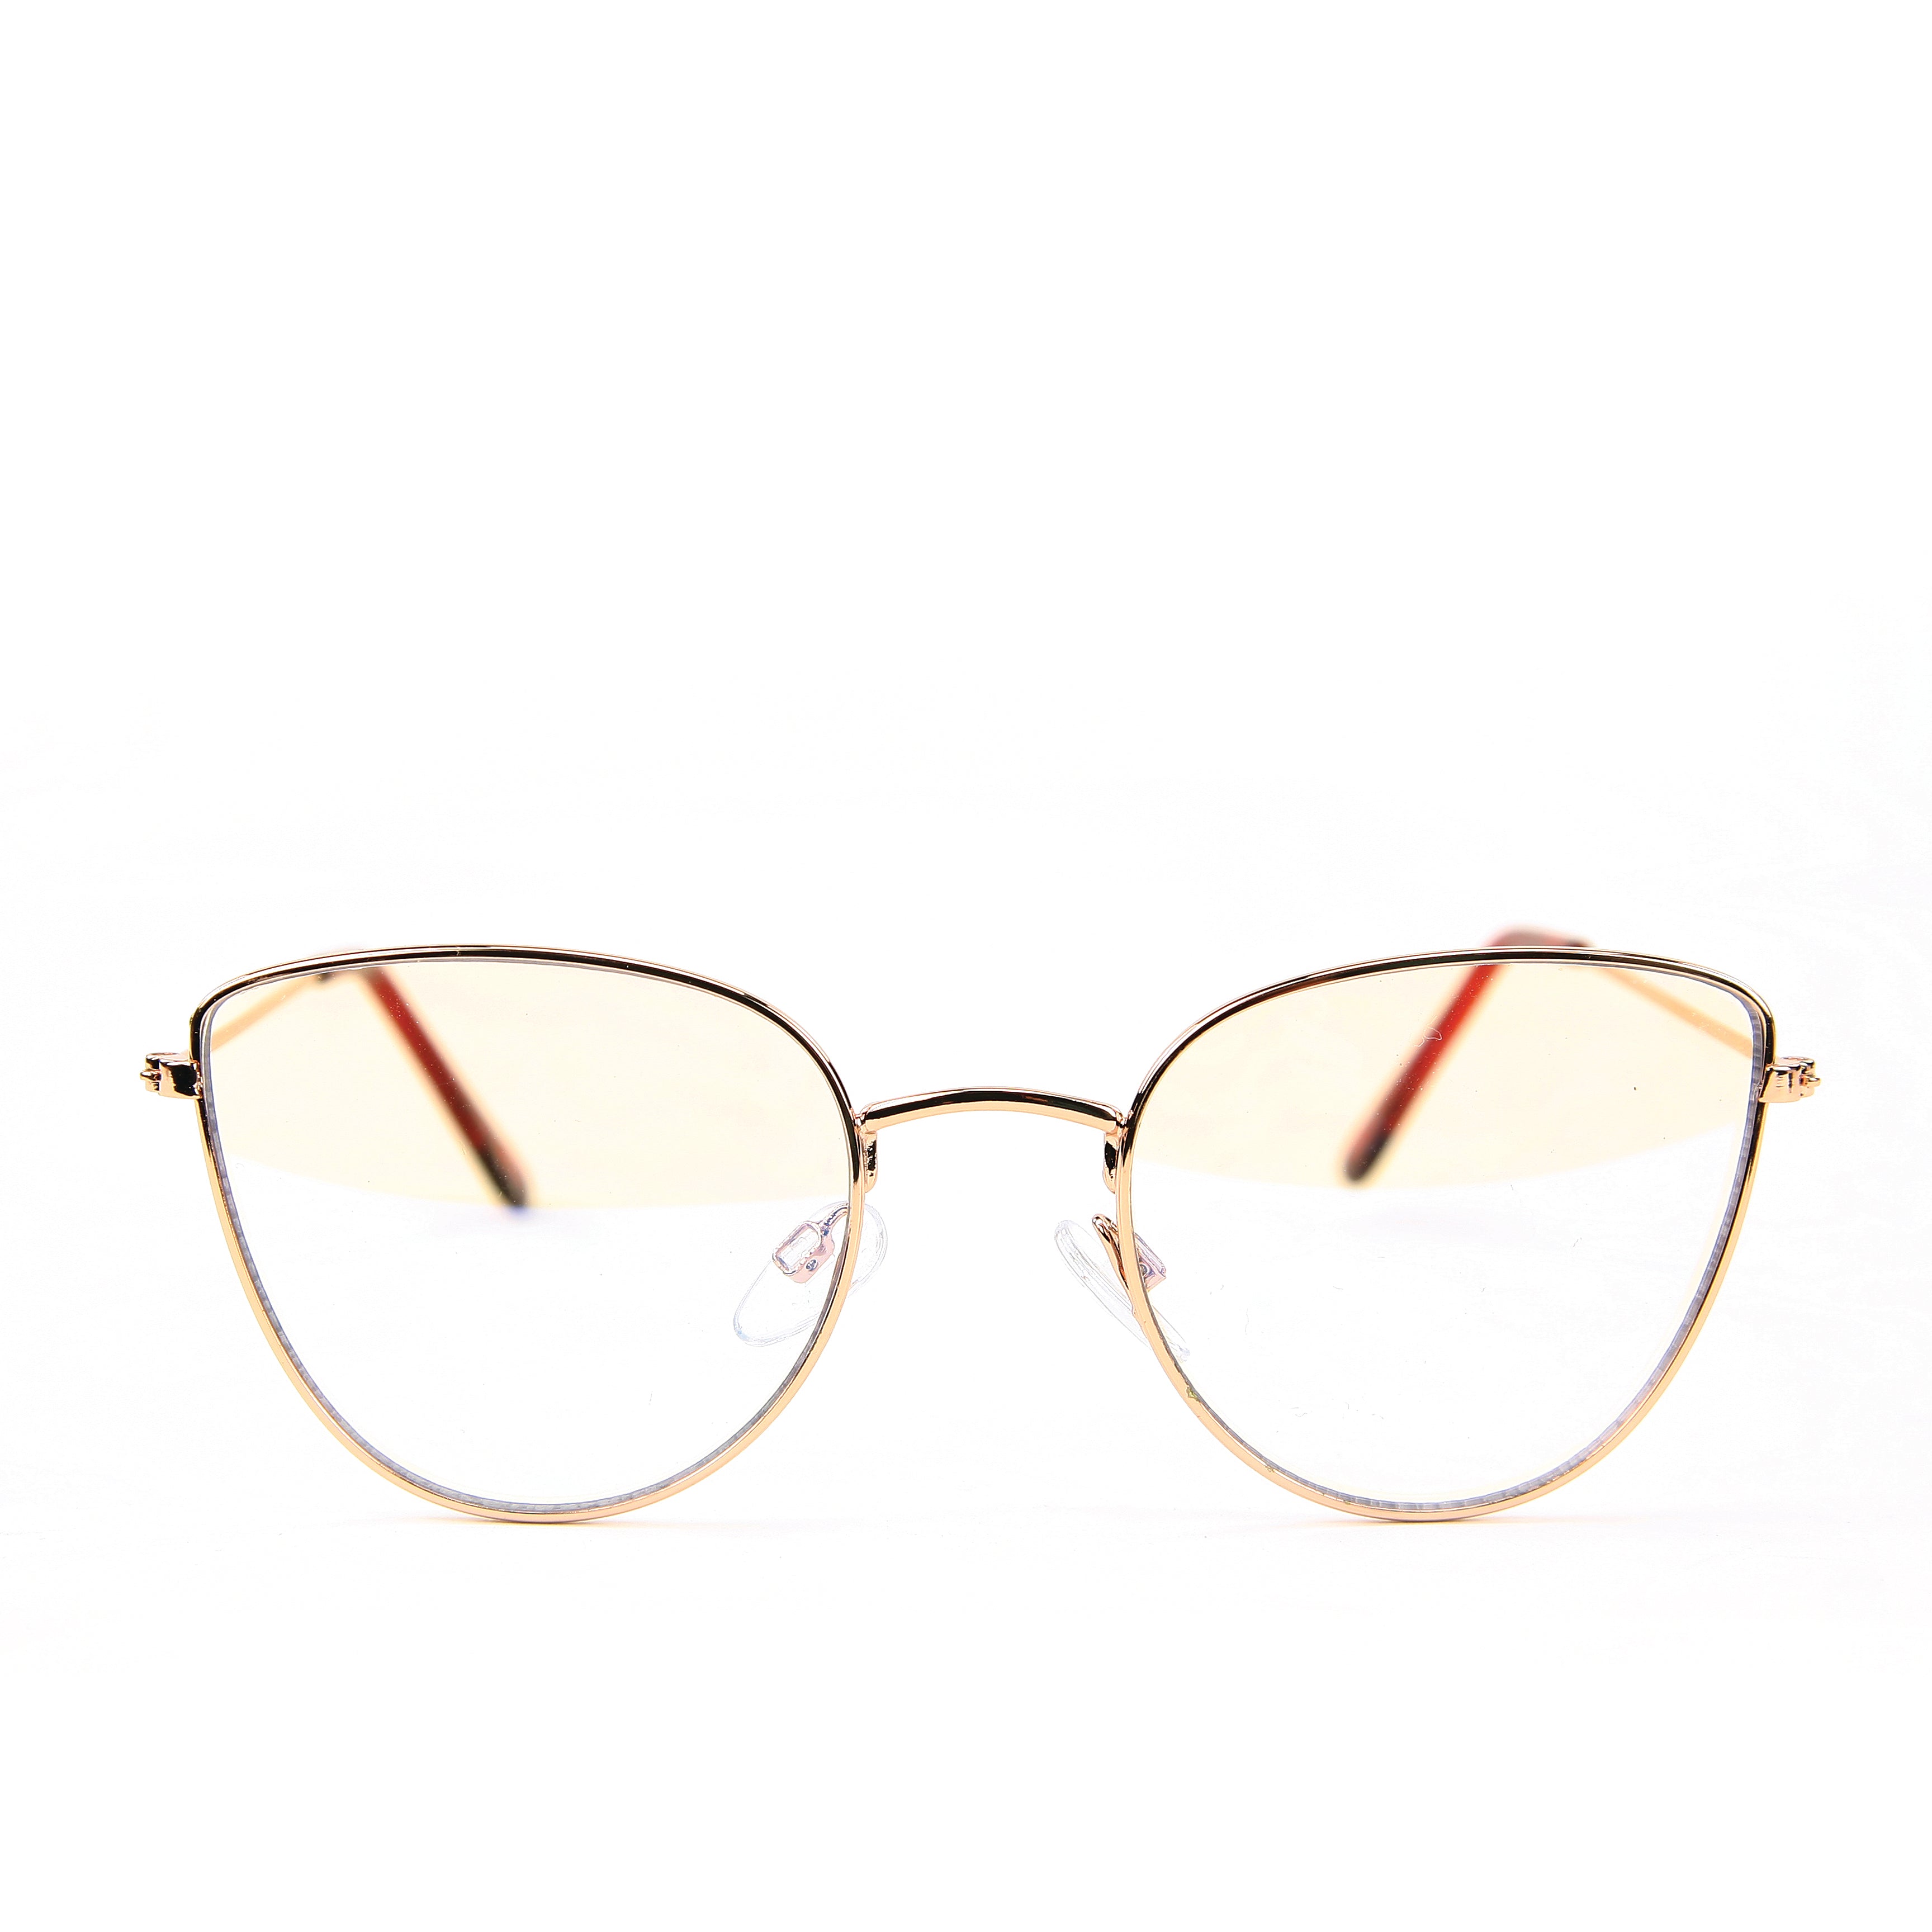 Blue Light Blocking Glasses, gold color, front view